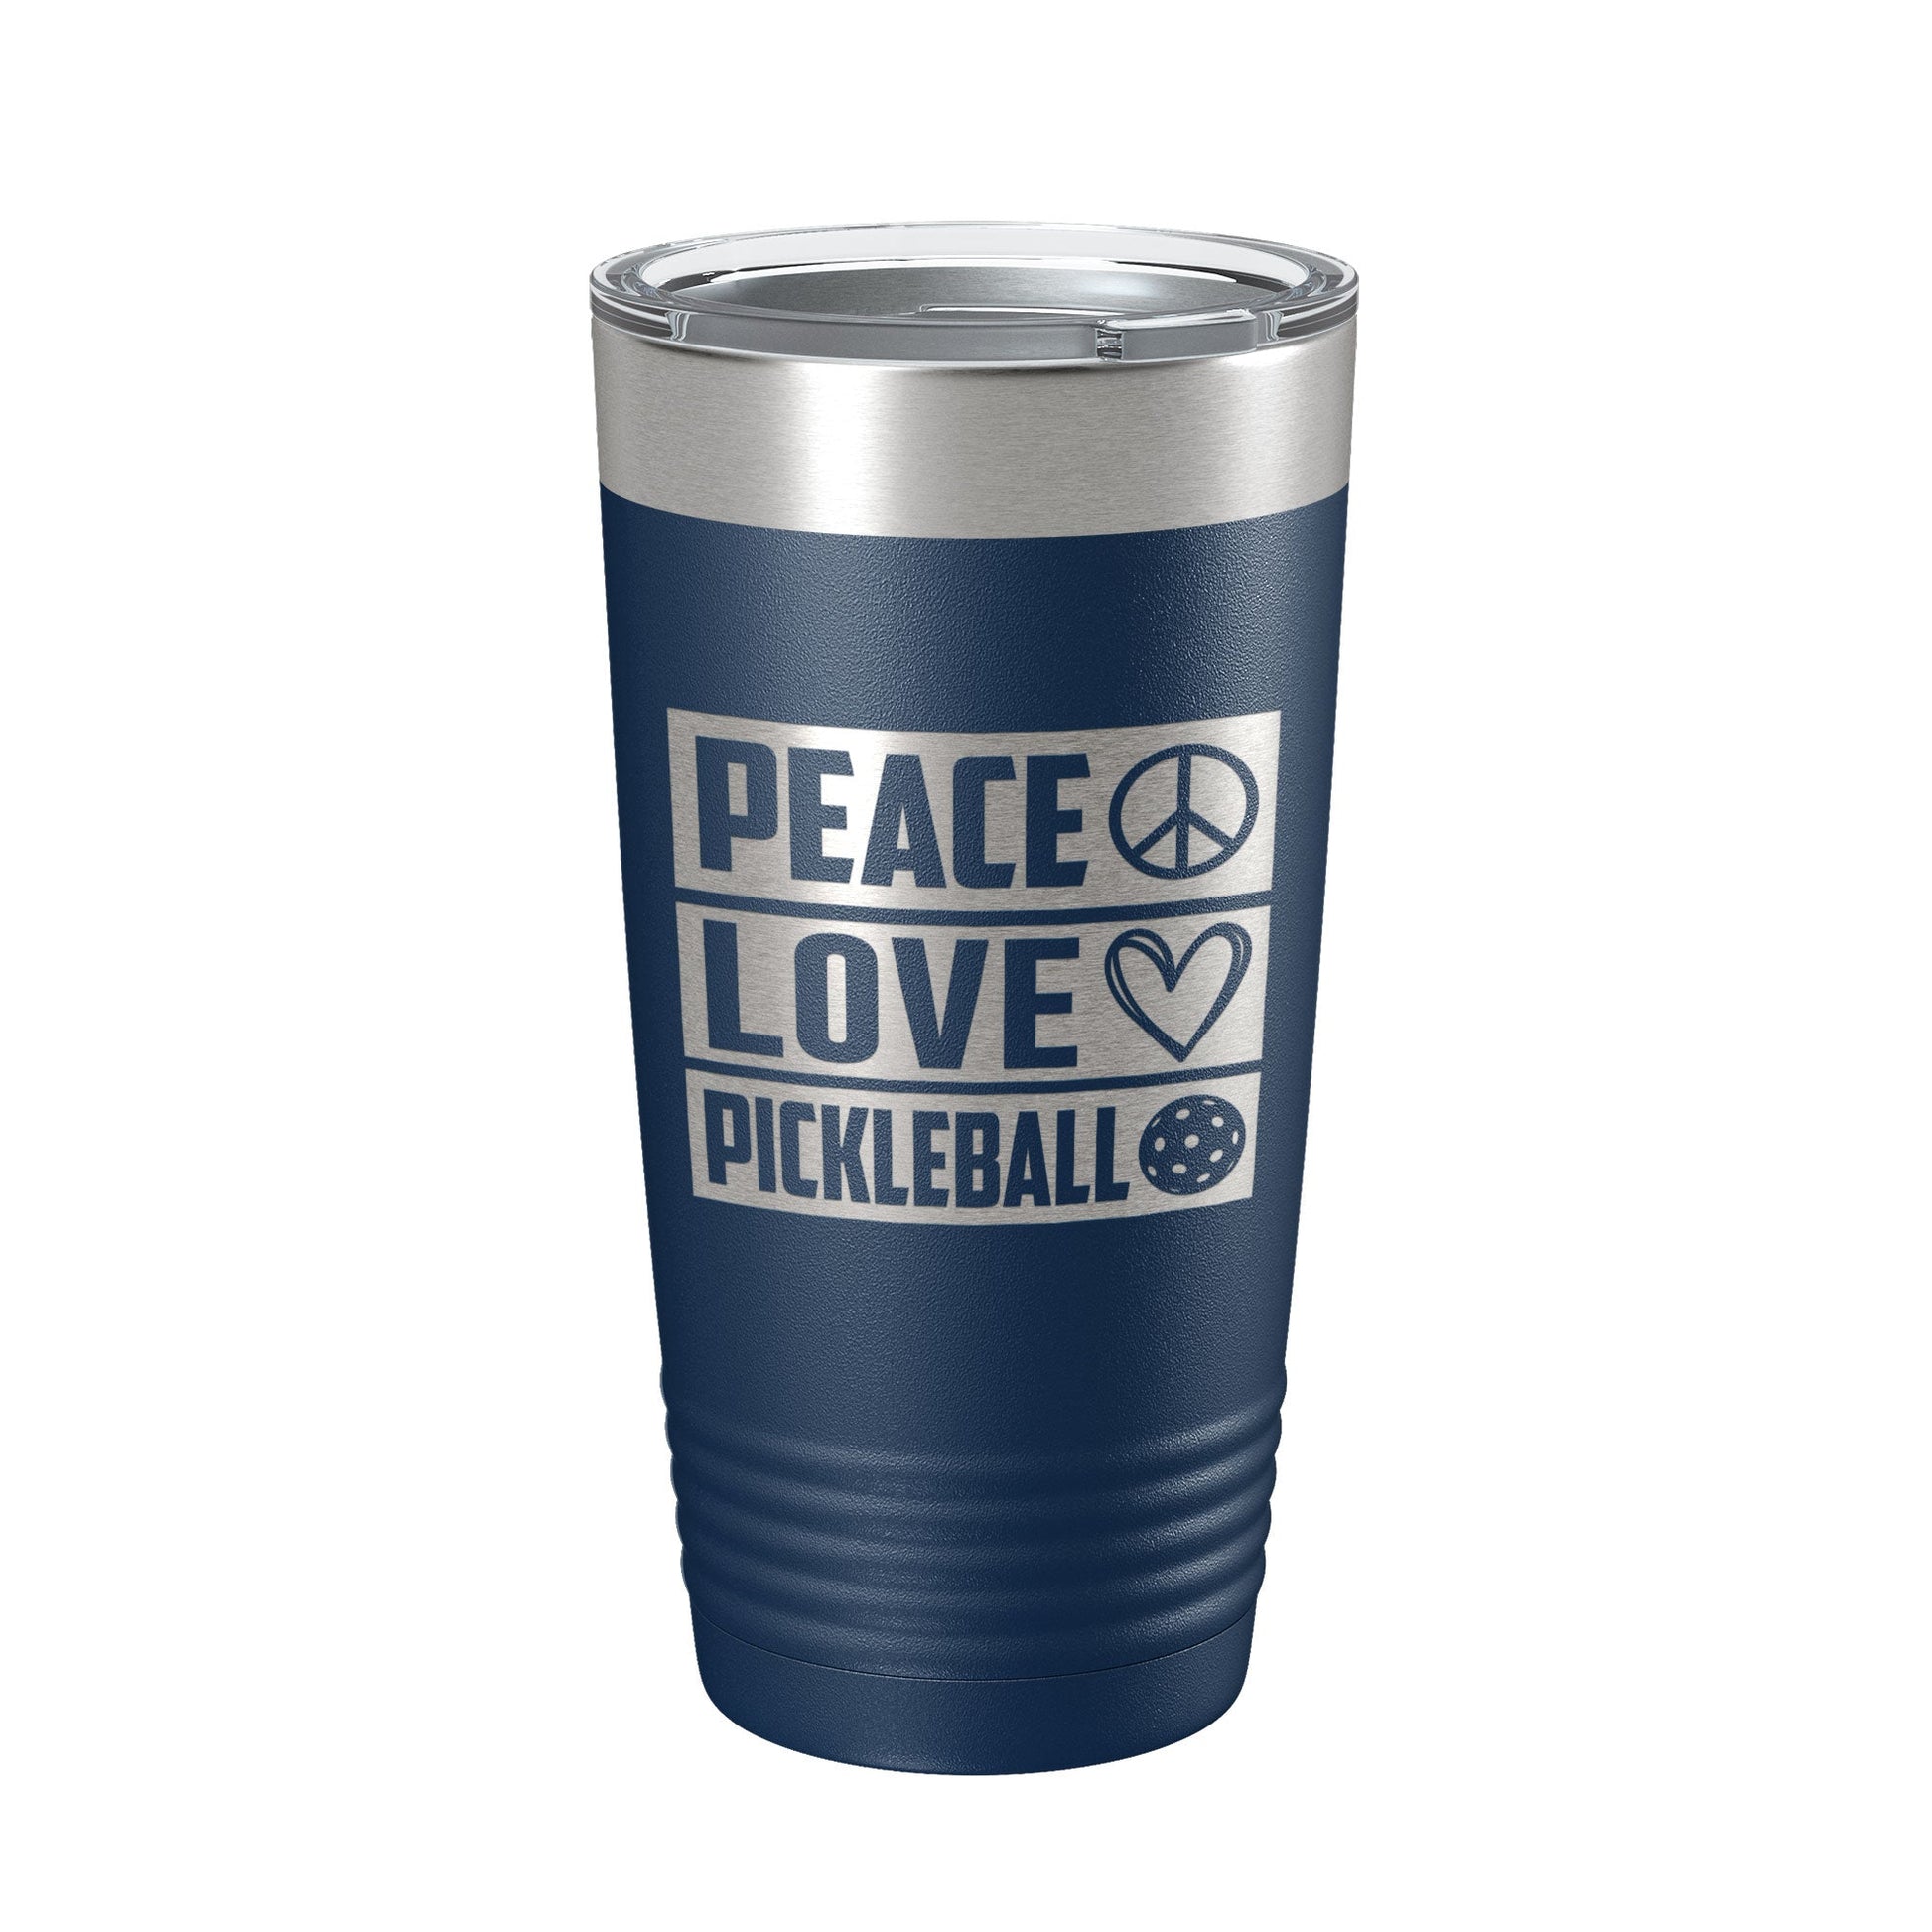 Peace Love Pickleball Tumbler Travel Mug Insulated Laser Engraved Coffee Cup Pickle Ball Gift 20 oz-8